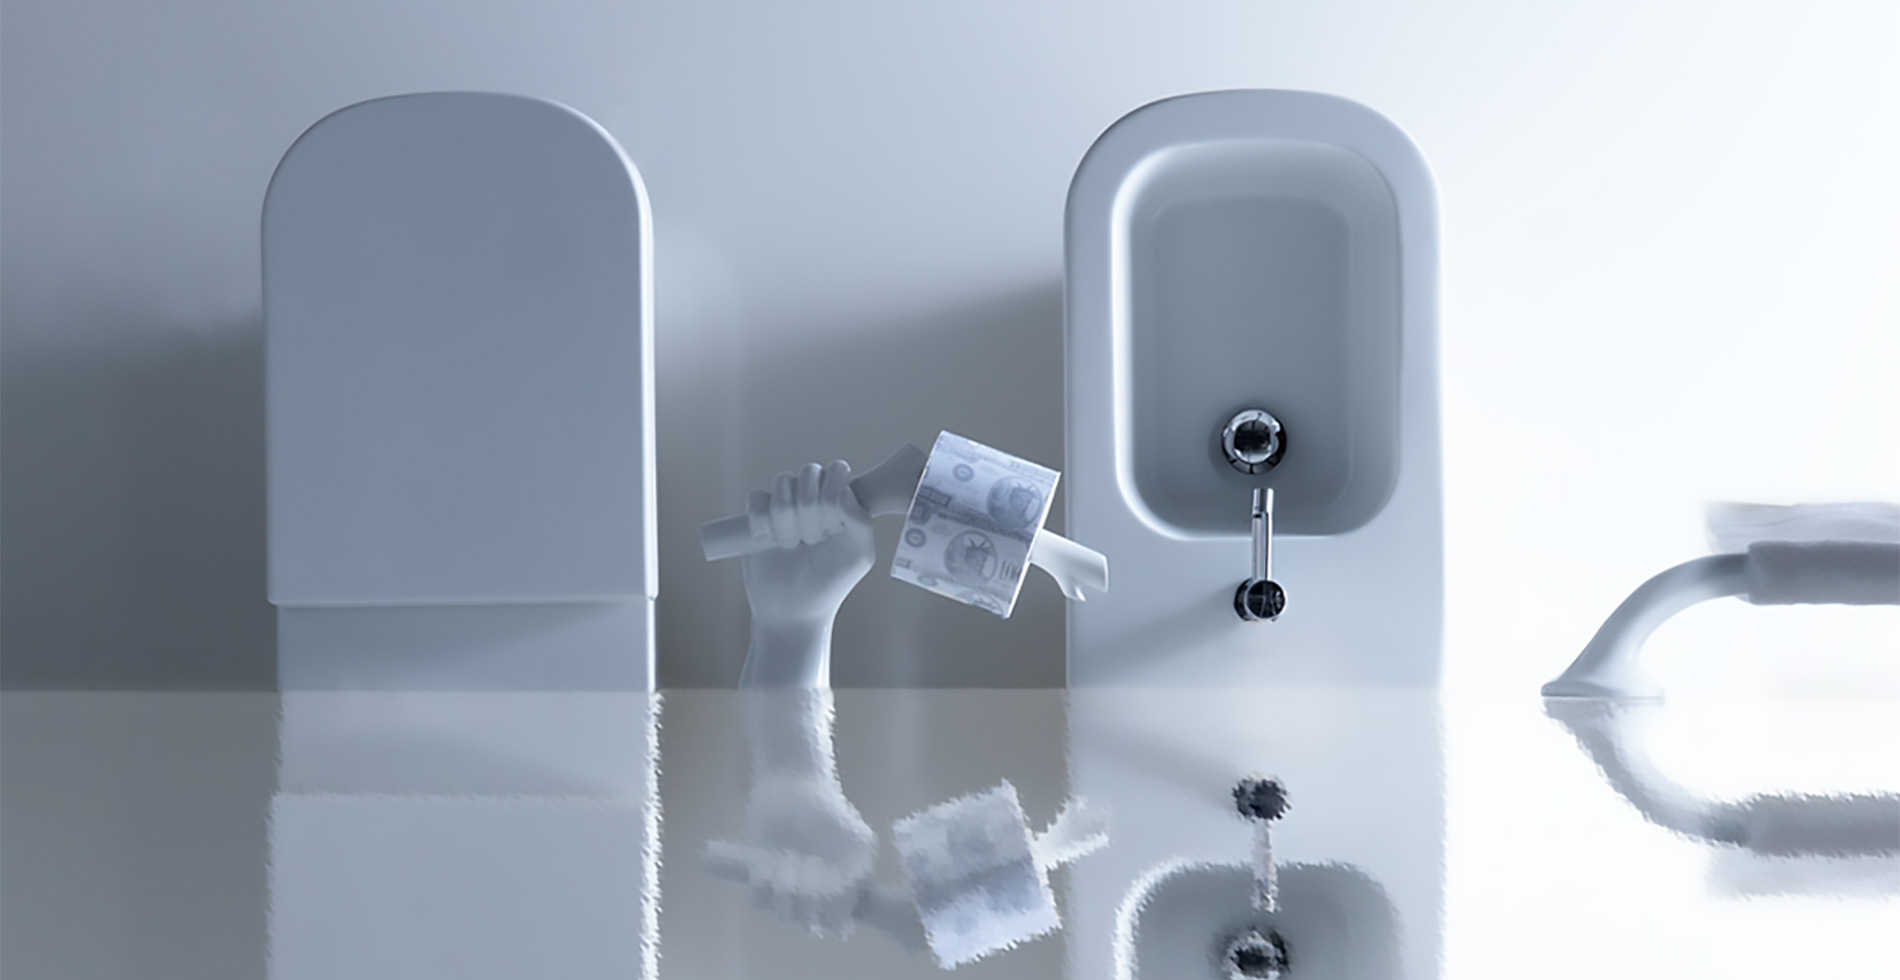 MEG11 ceramic roll holder | bathroom deco inspired on nature, tree, branch, hand | Design by Antonio Pascale for Galassia